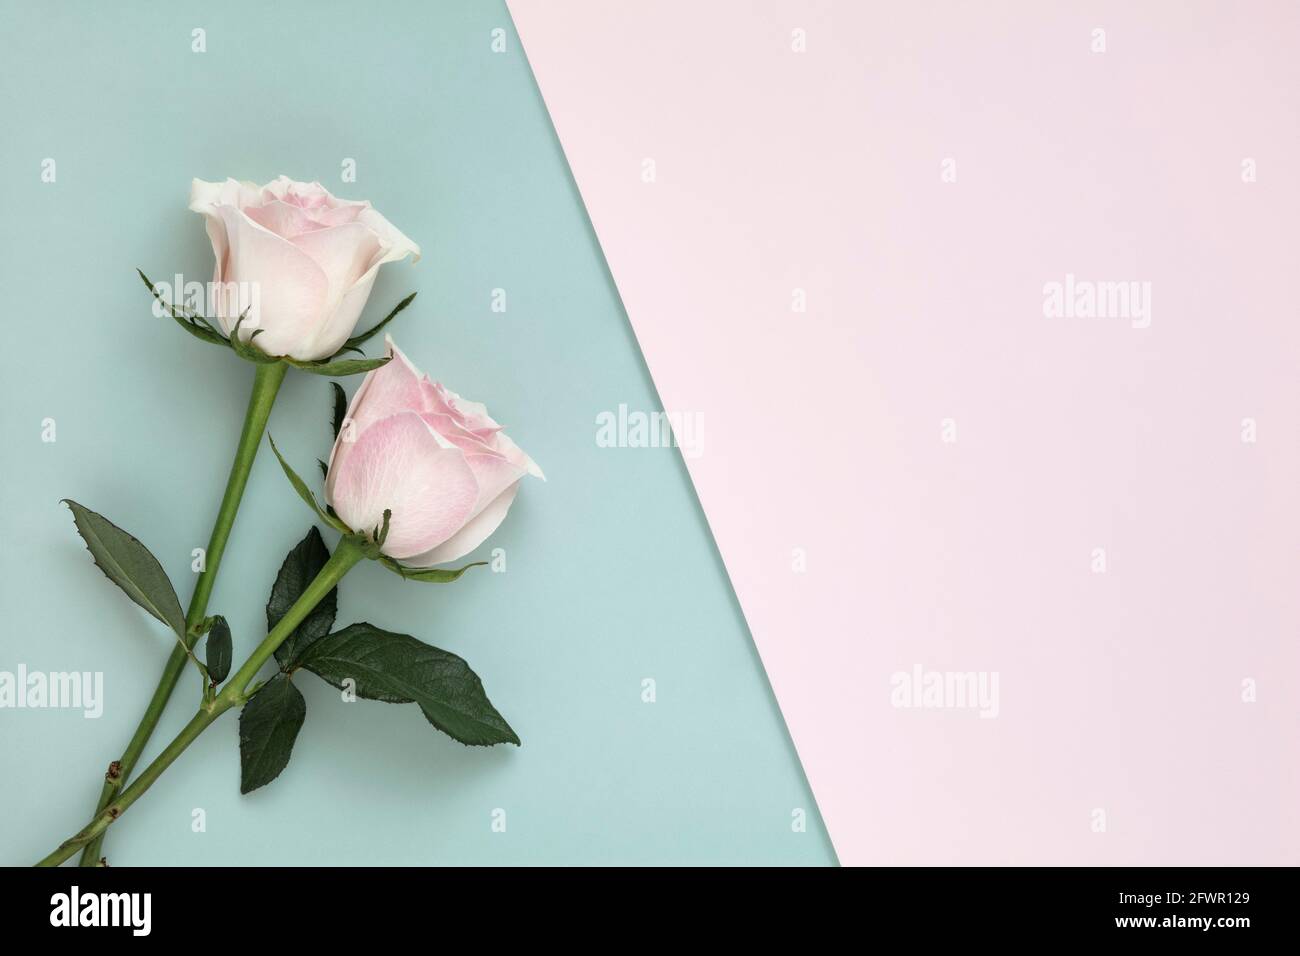 Roses on light cyan and pink plain background Stock Photo